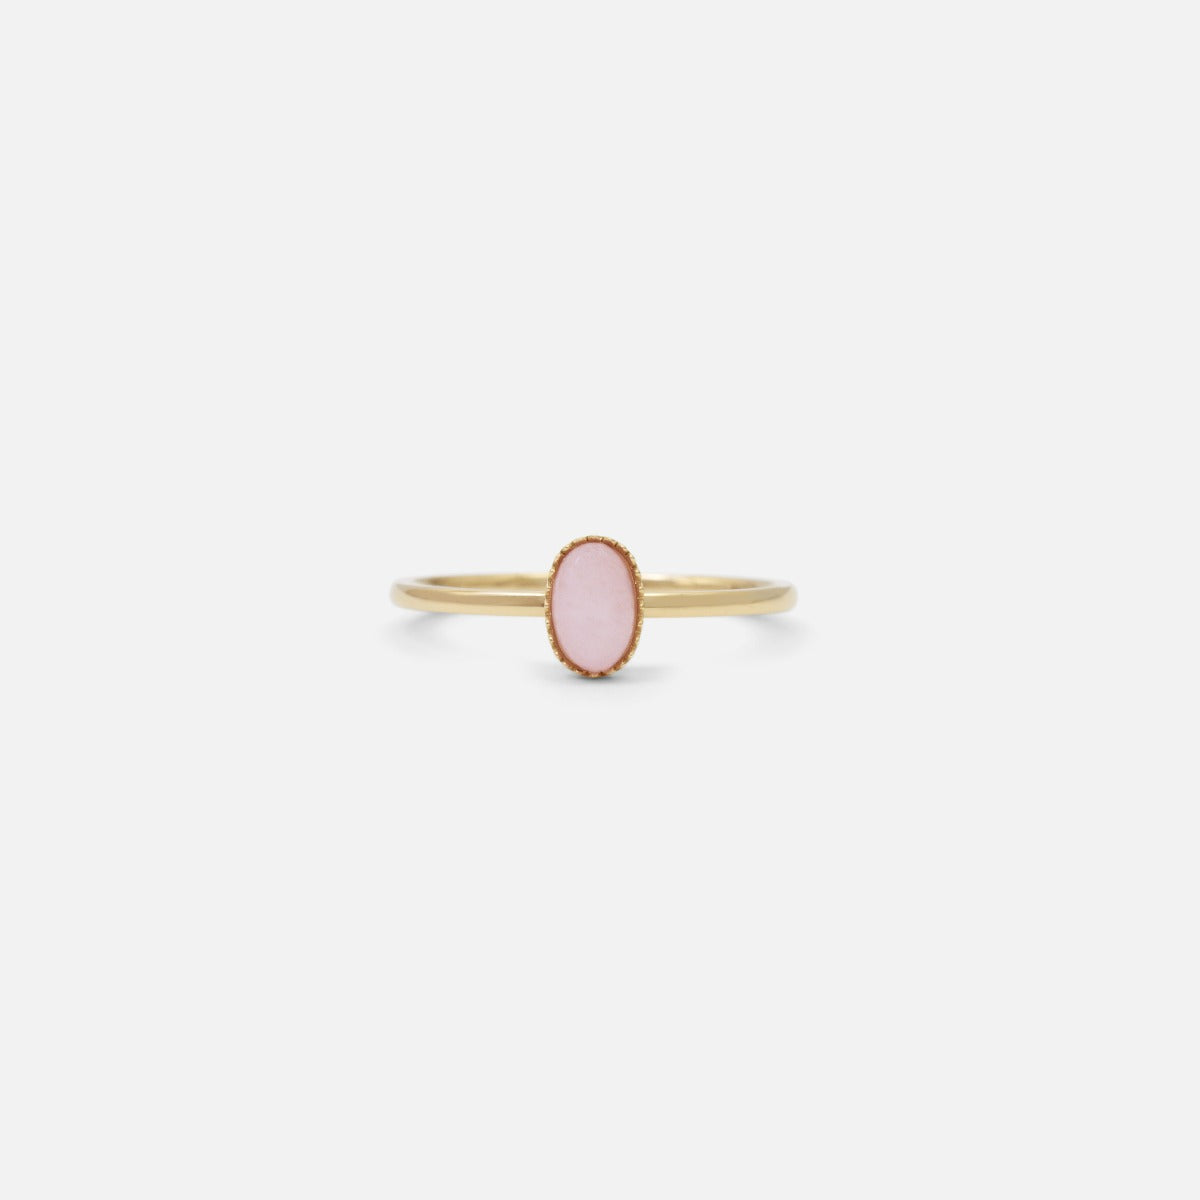 Set of golden stainless steel rings with pink stone and pearl